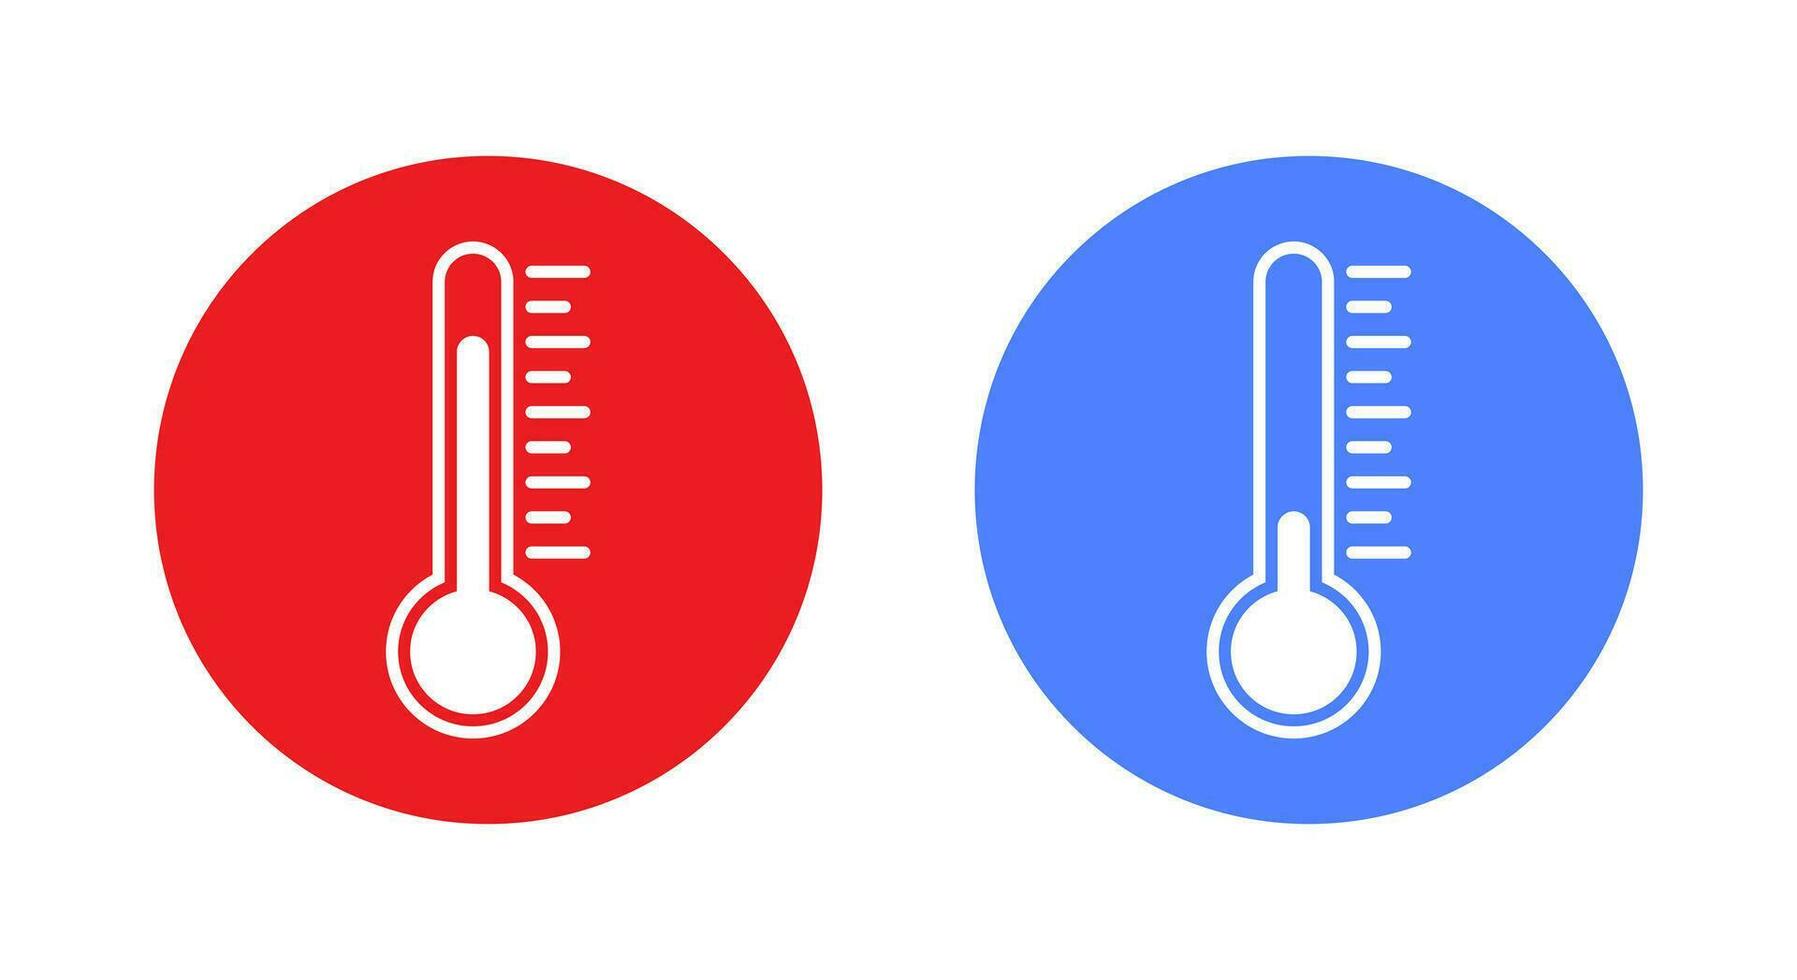 Temperature, thermometer icon vector on circle background